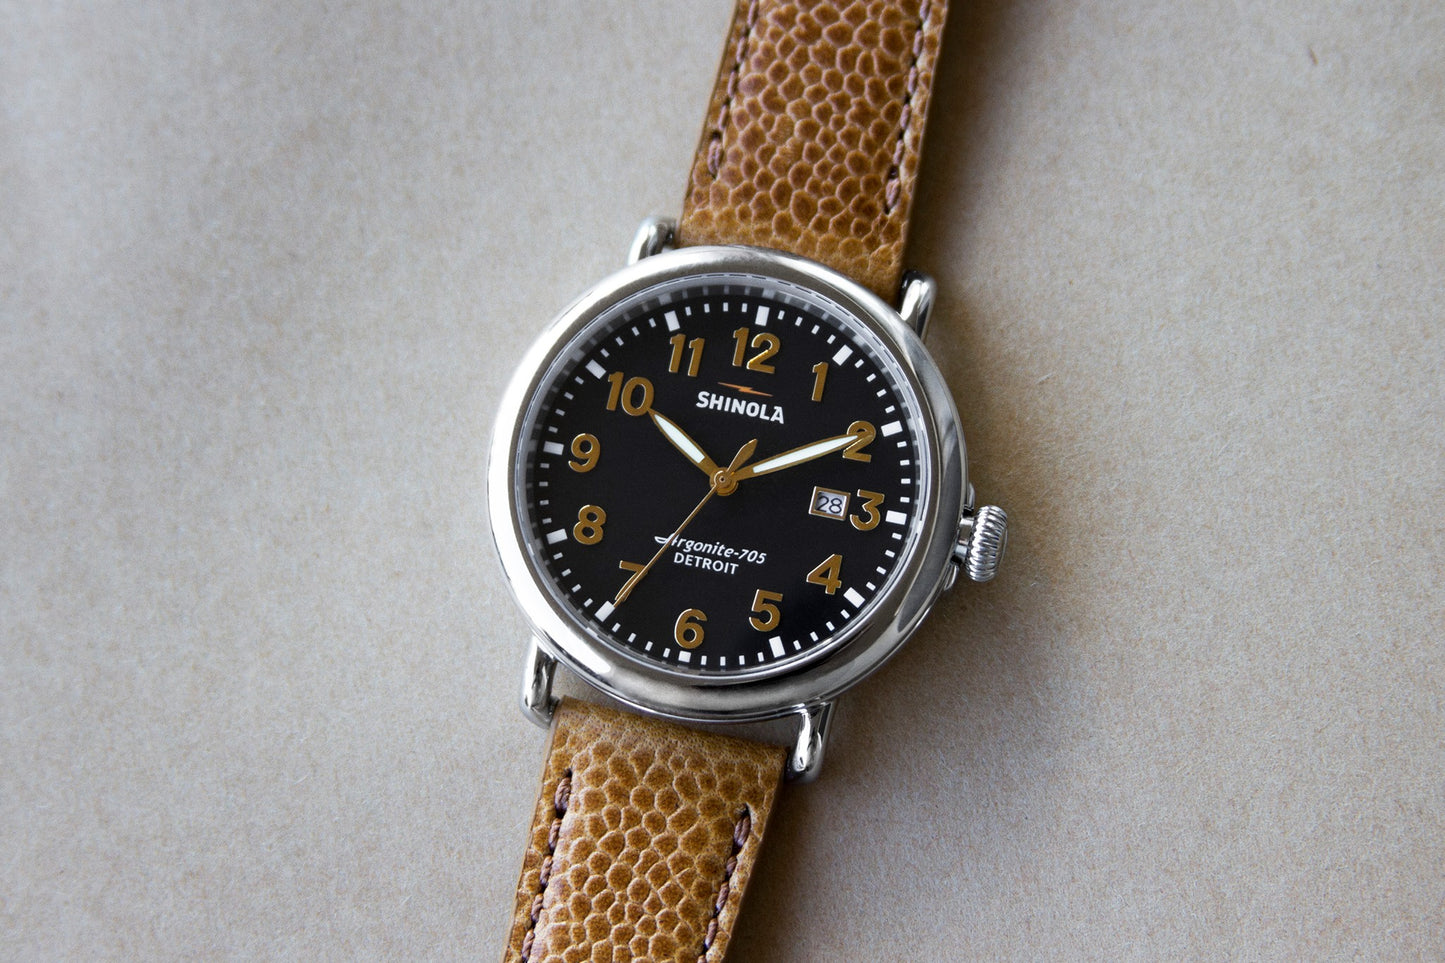 Shinola watch THE RUNWELL 41mm in Camel and Black